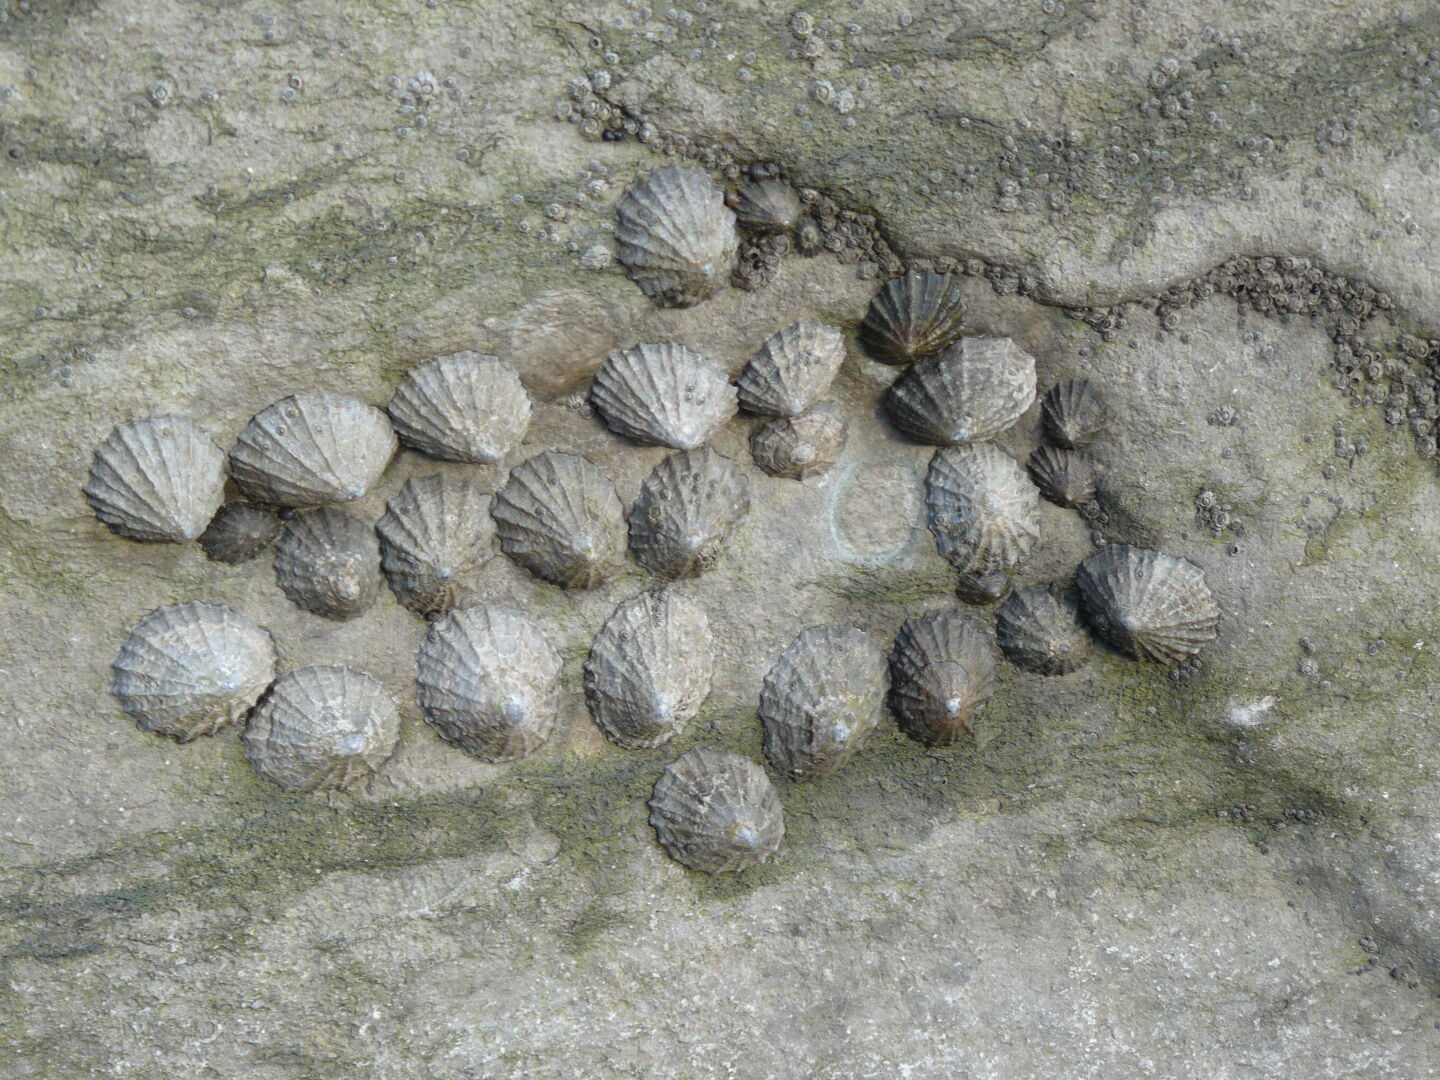 Lots of these small sea snails can be found clinging to the rocks.